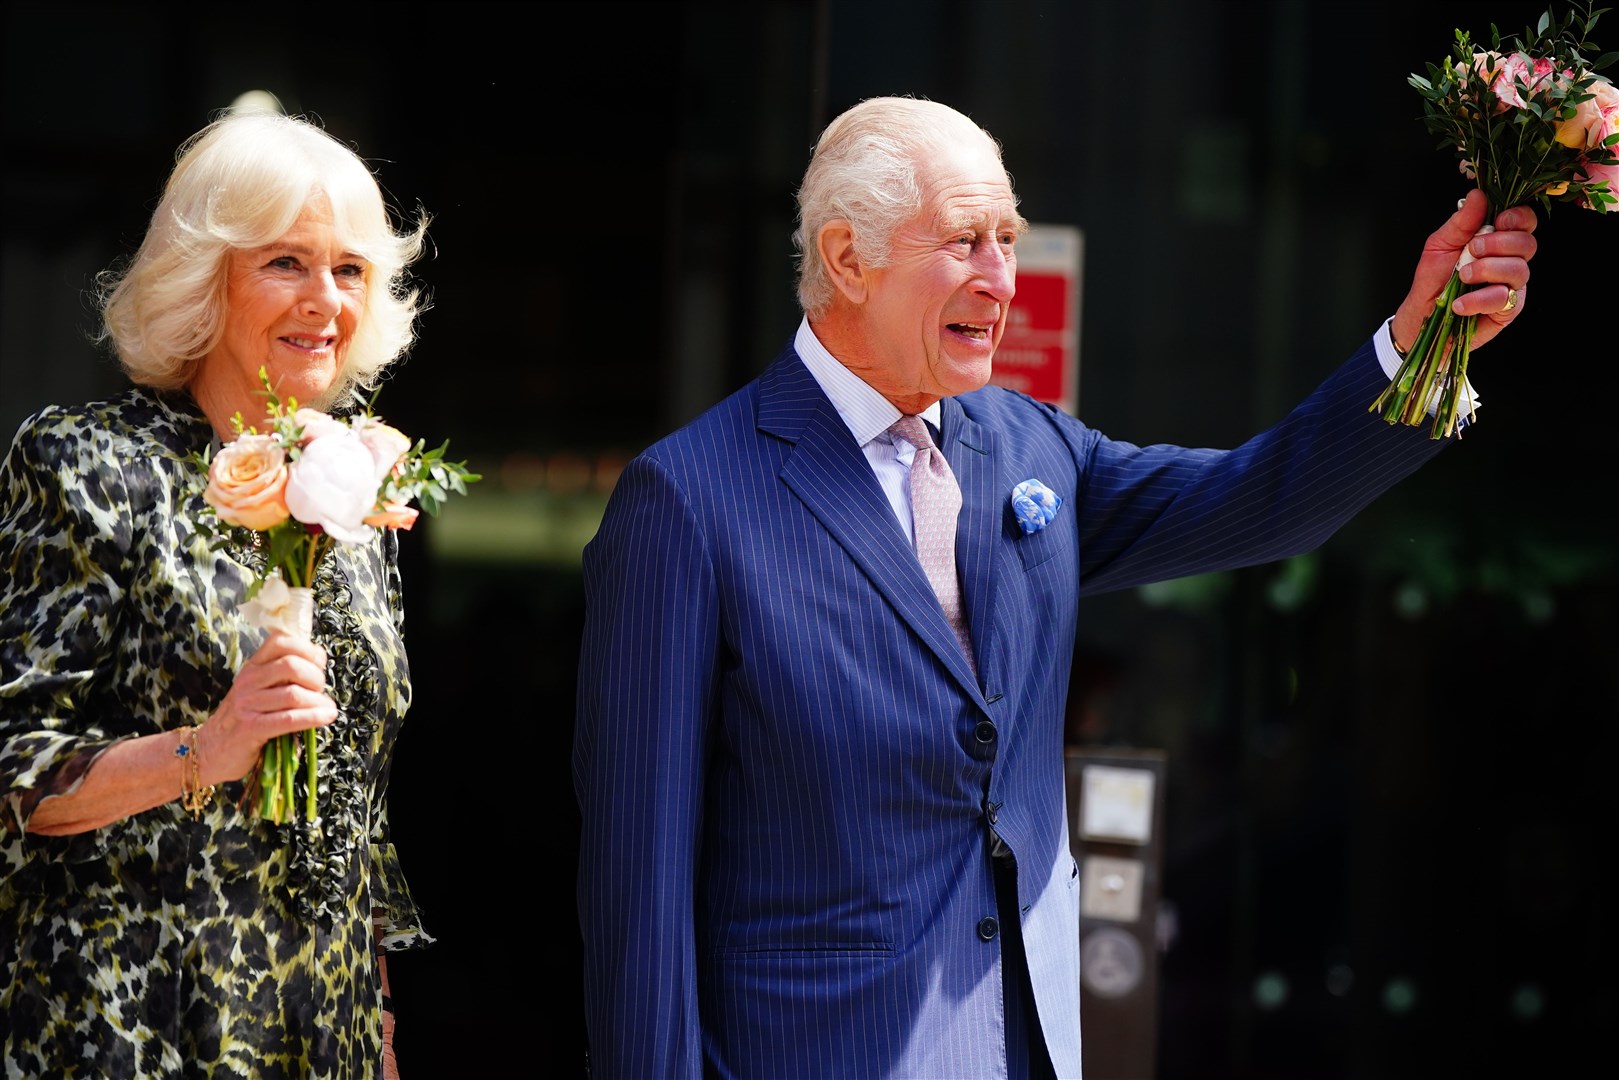 The King and Queen after a visit to University College Hospital Macmillan Cancer Centre, London (Victoria Jones/PA)